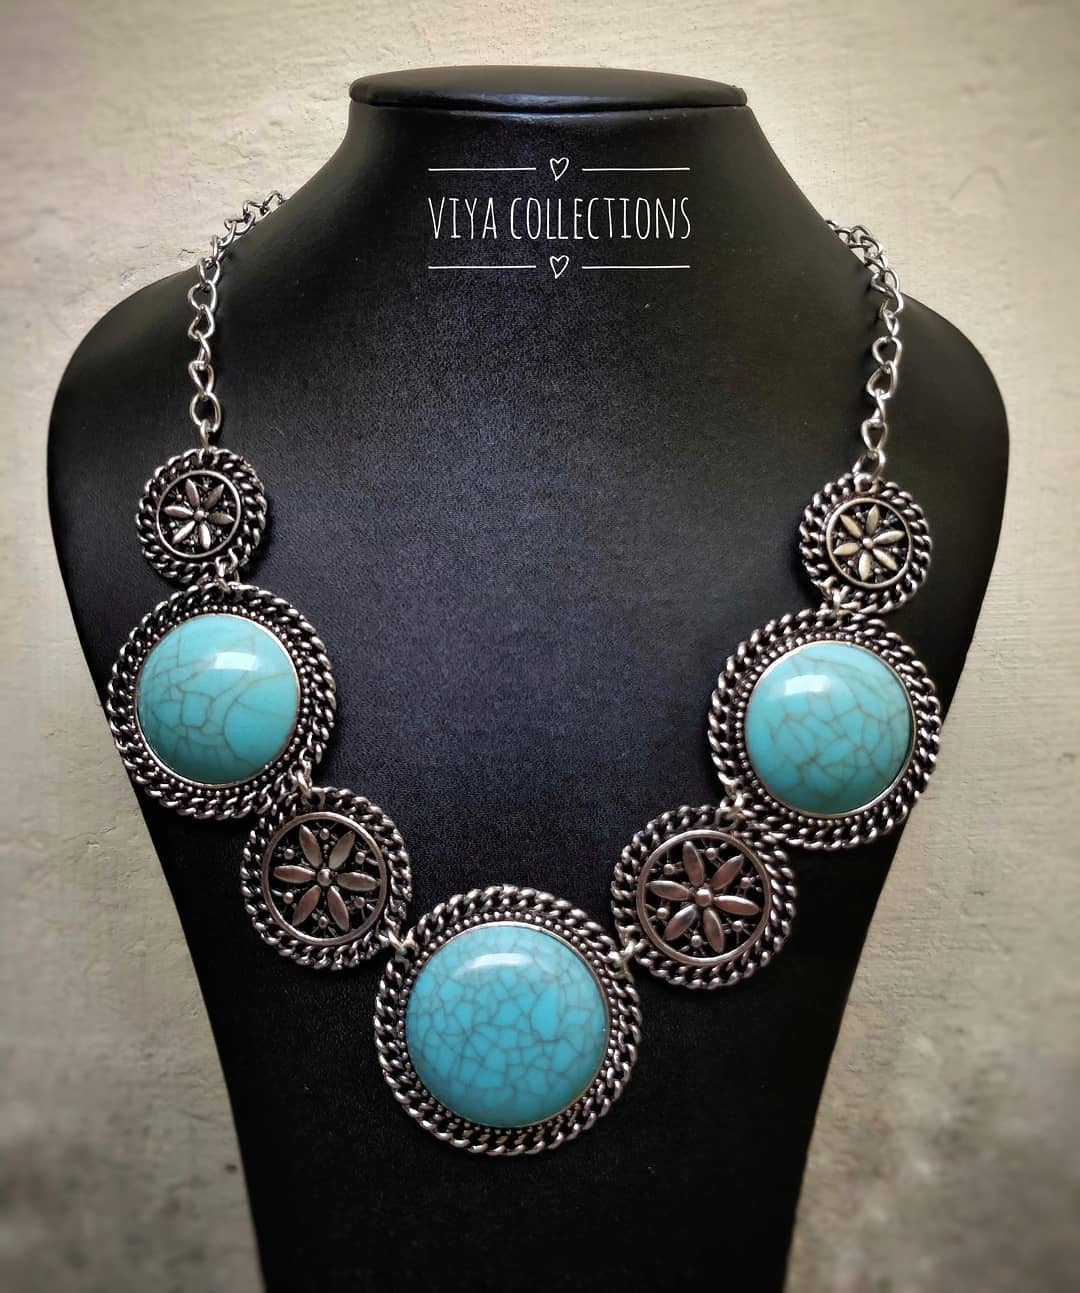 Unique Fashionable Necklace From Viyacollections